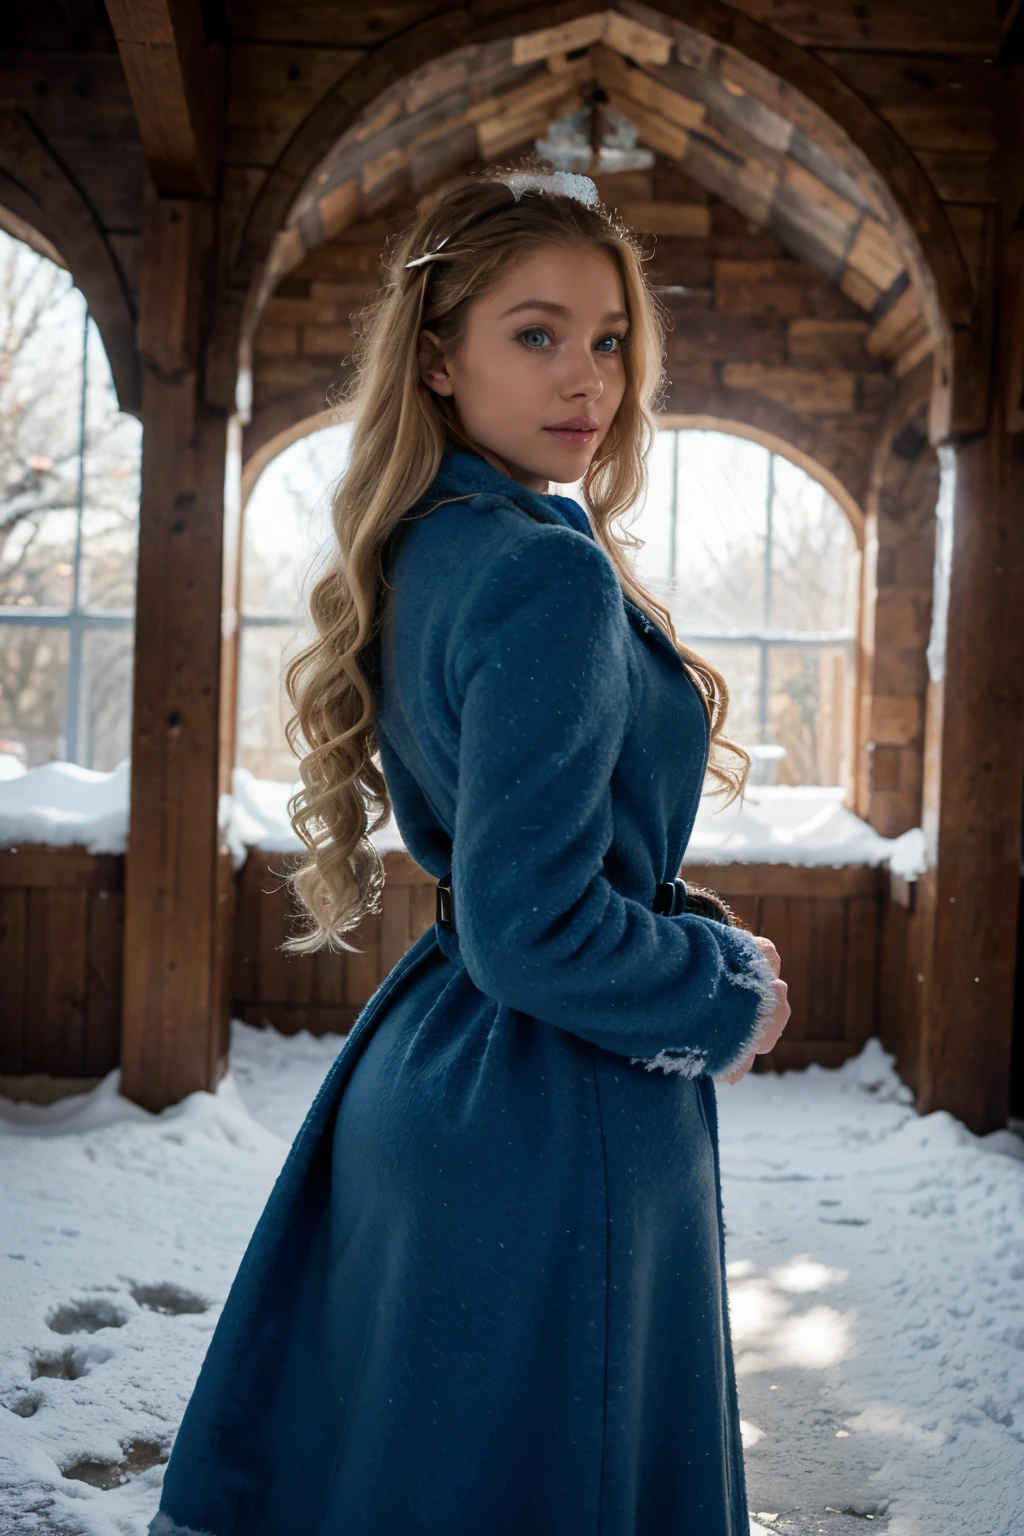 Transition the Christmas photoshoot Explore an ice castle or sculpture garden for a magical and artistic winter setting, featuring a blonde girl with cascading, curly hair till her sholders, enchanting blue eyes, and an alluring physique, enjoying the warmth from her wool coat,view from behind, Photography, Nikon Z7, 50mm f/1.8 lens